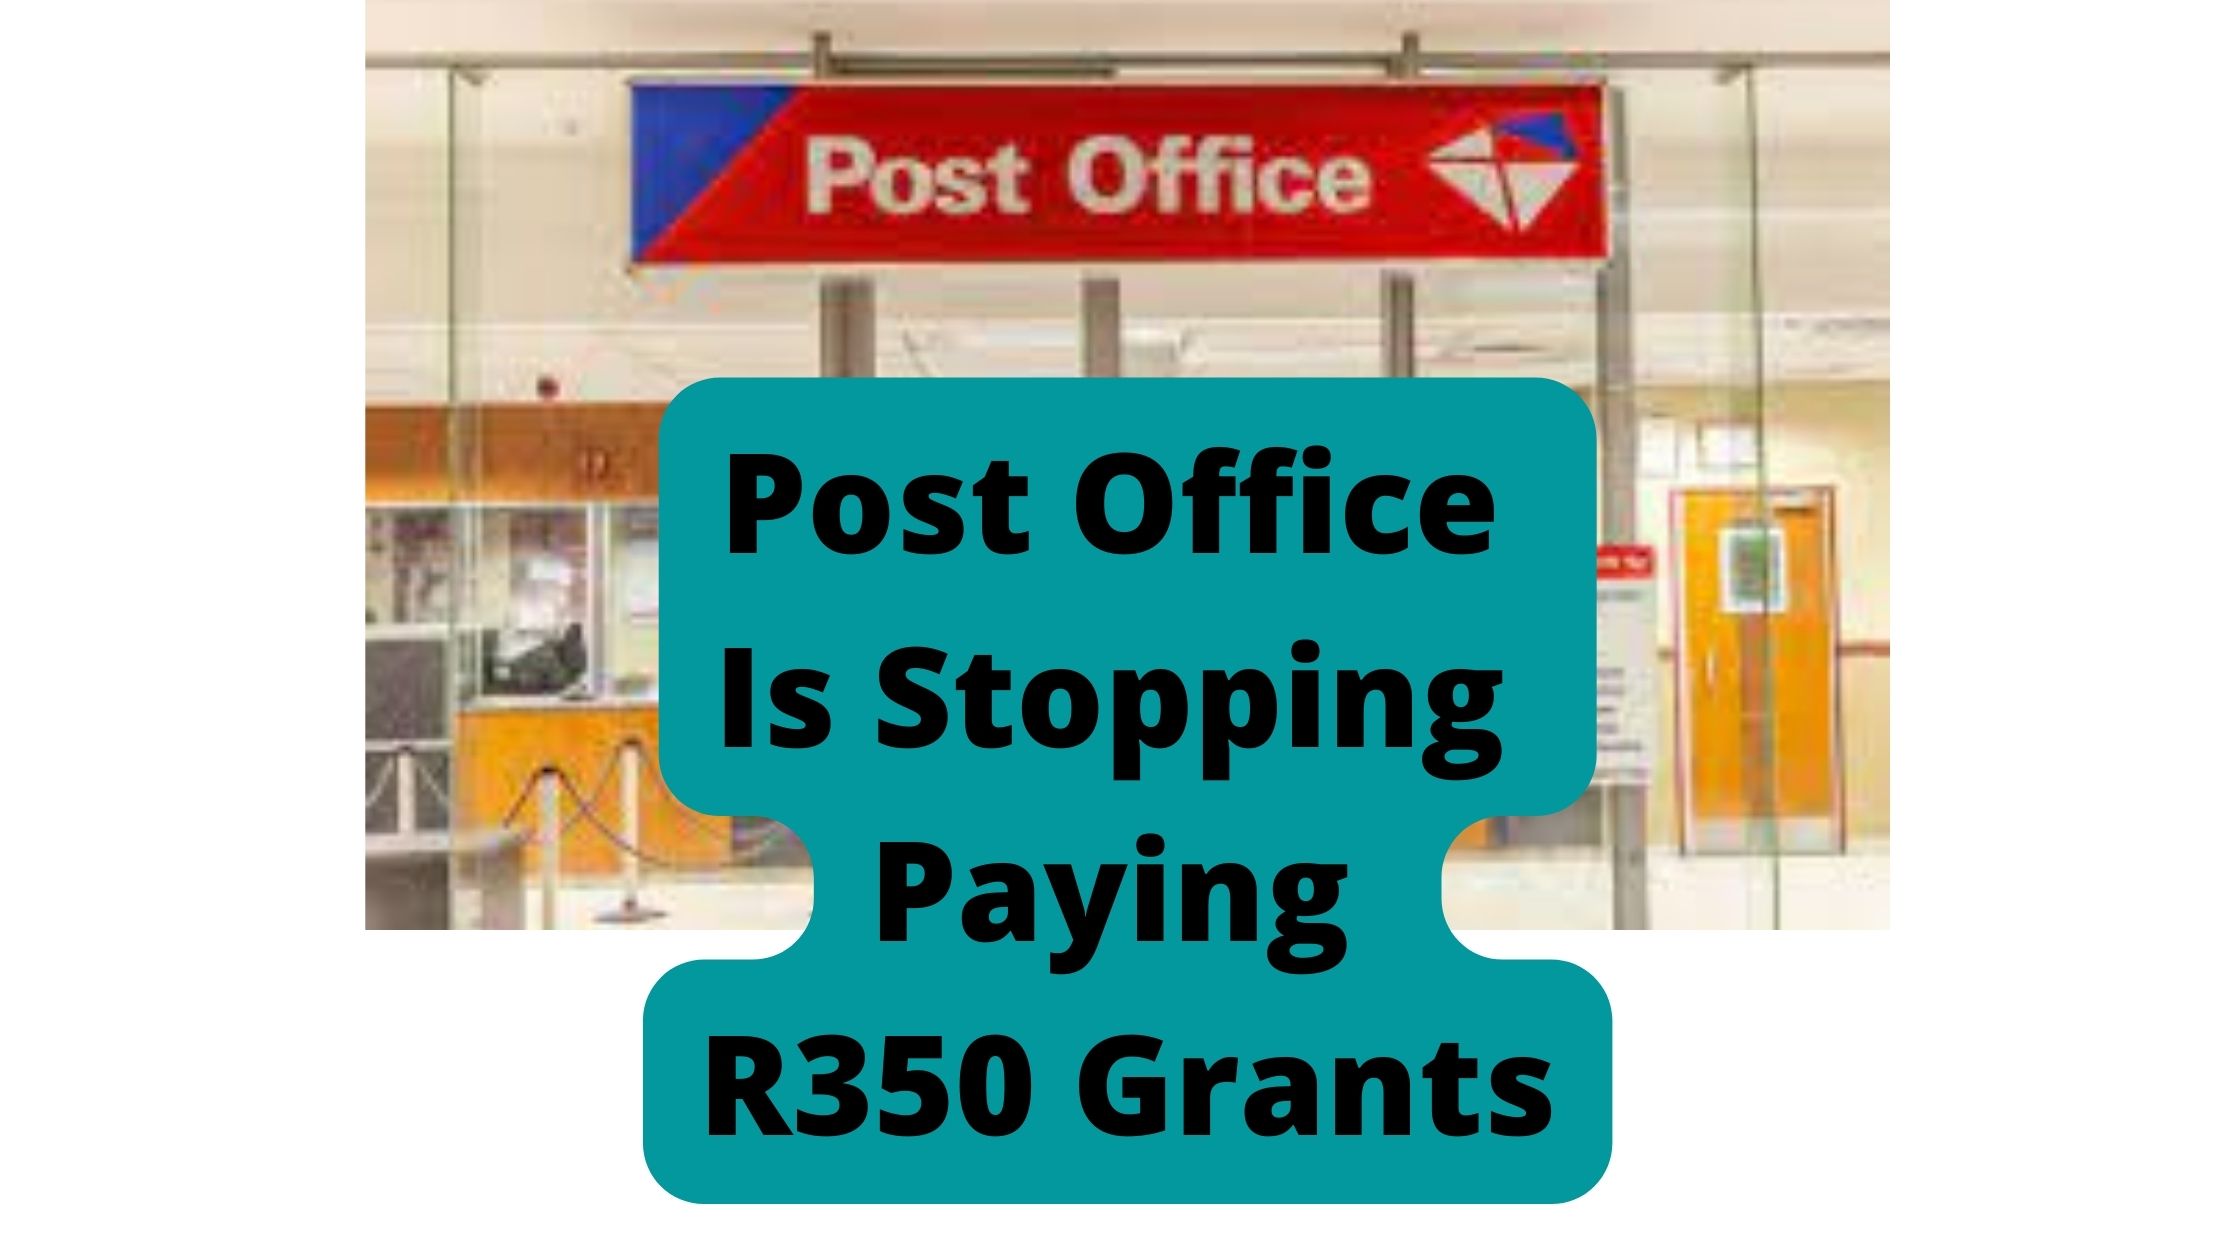 Post Office Is Stopping Paying R350 Grants